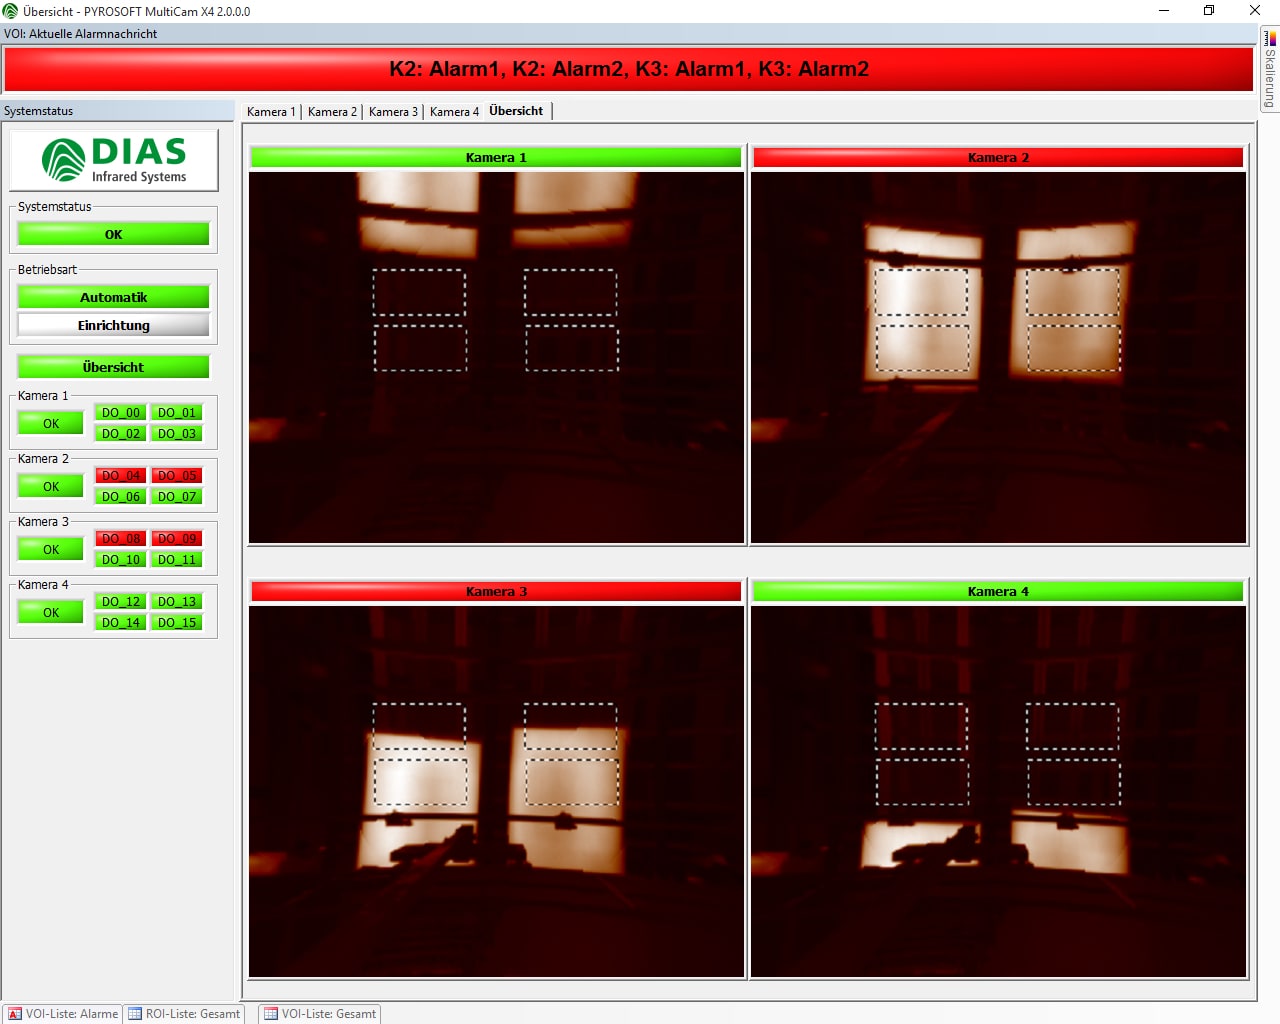 Software for the data acquisition and image display of up to 8 DIAS cameras